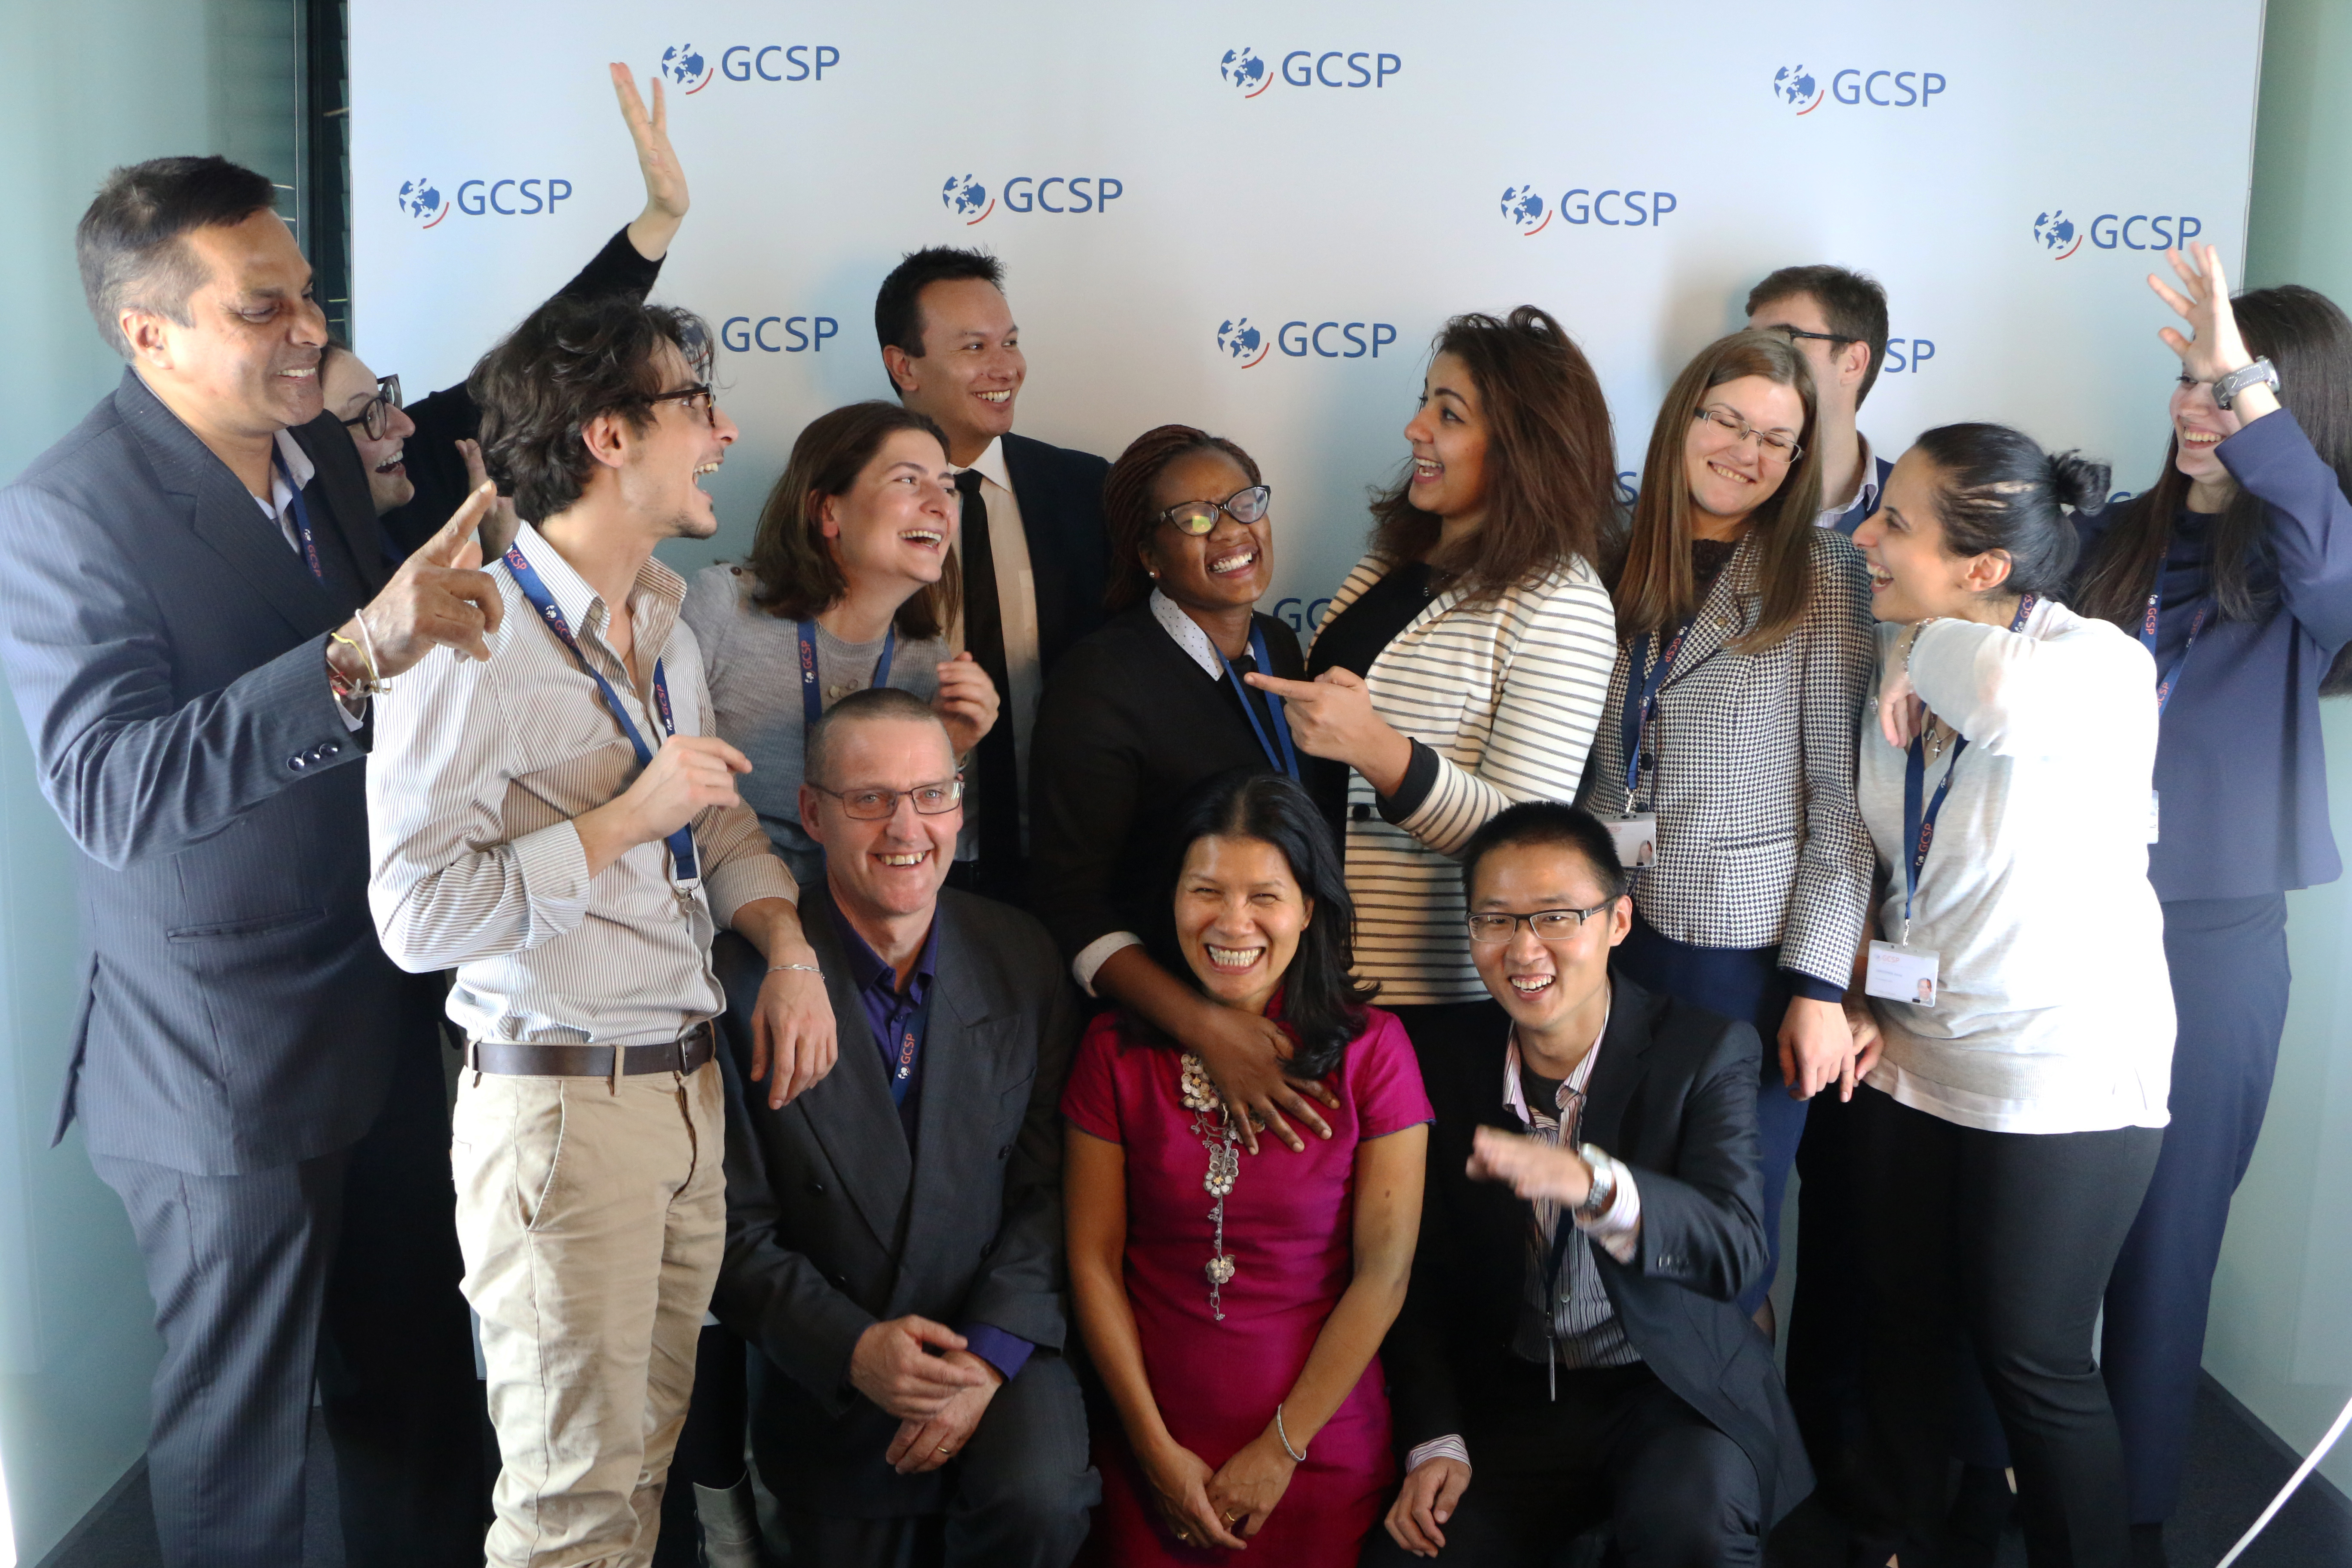 The GCSP’s Flagship Course celebrates 35 years